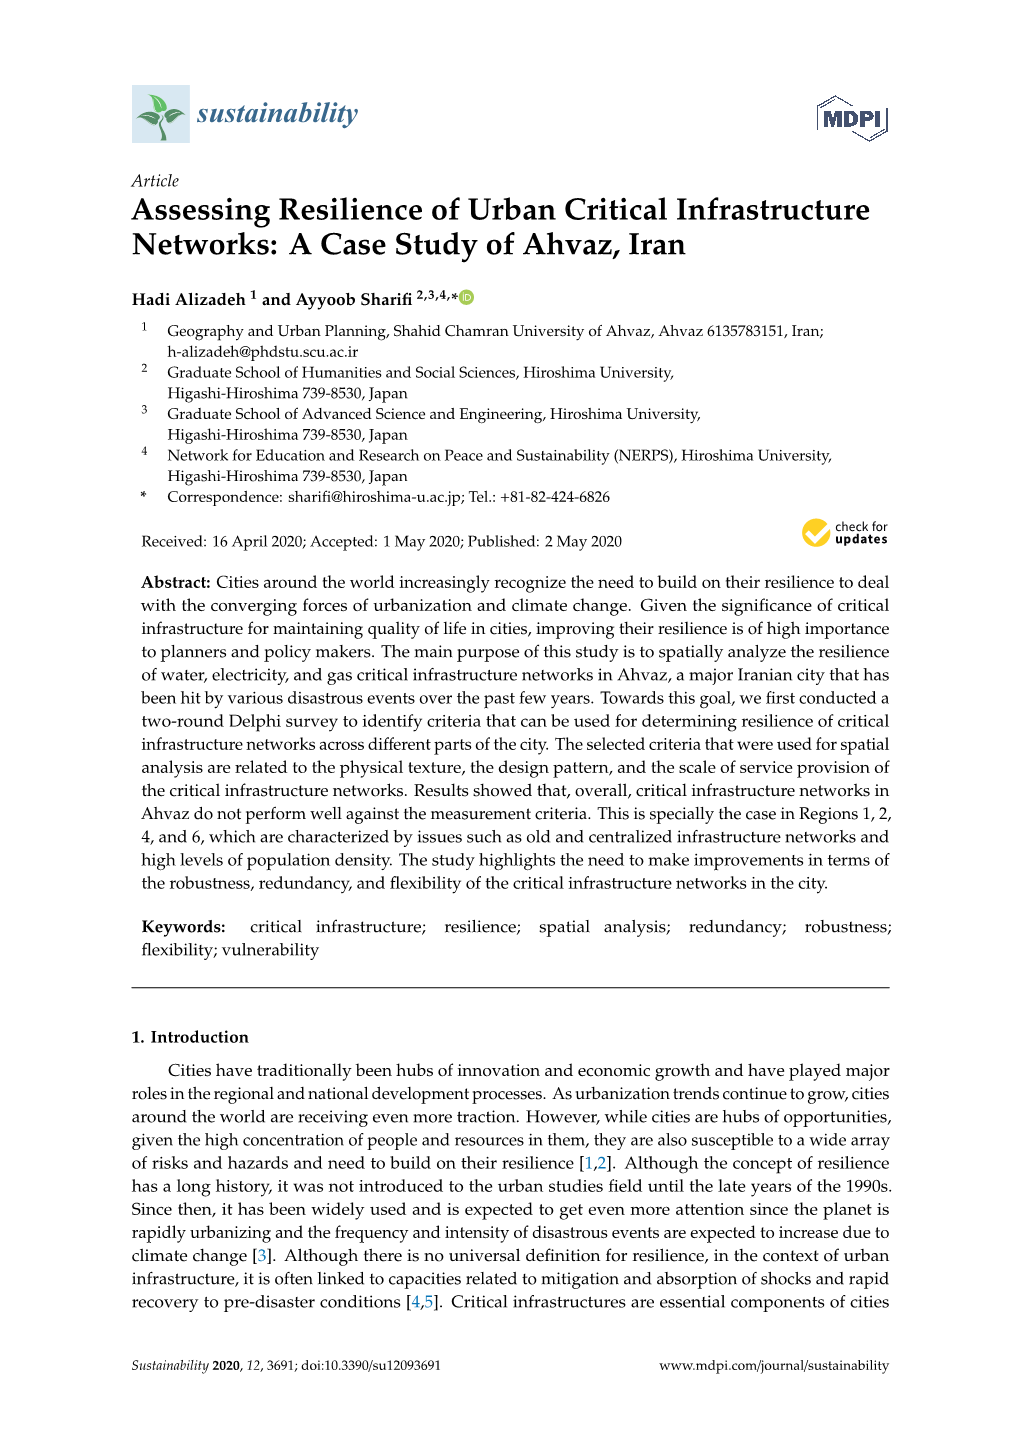 Assessing Resilience of Urban Critical Infrastructure Networks: a Case Study of Ahvaz, Iran